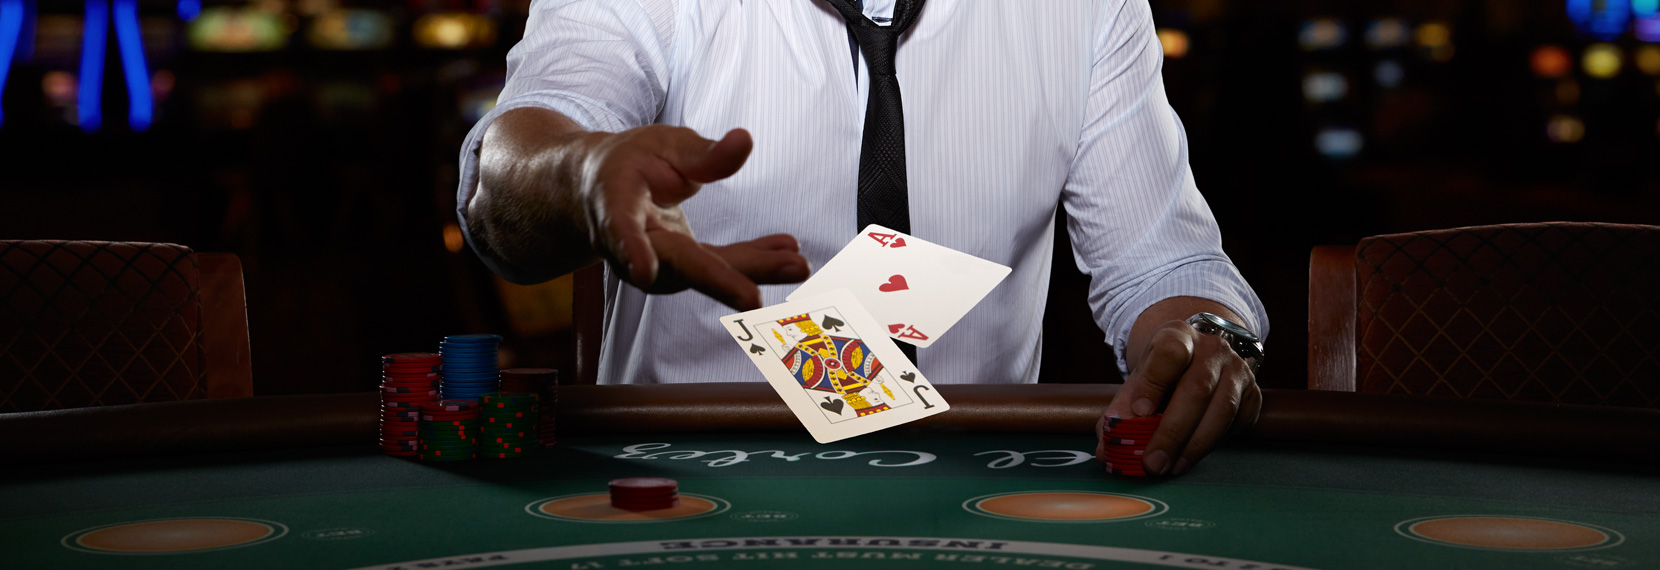 blackjack player and cards